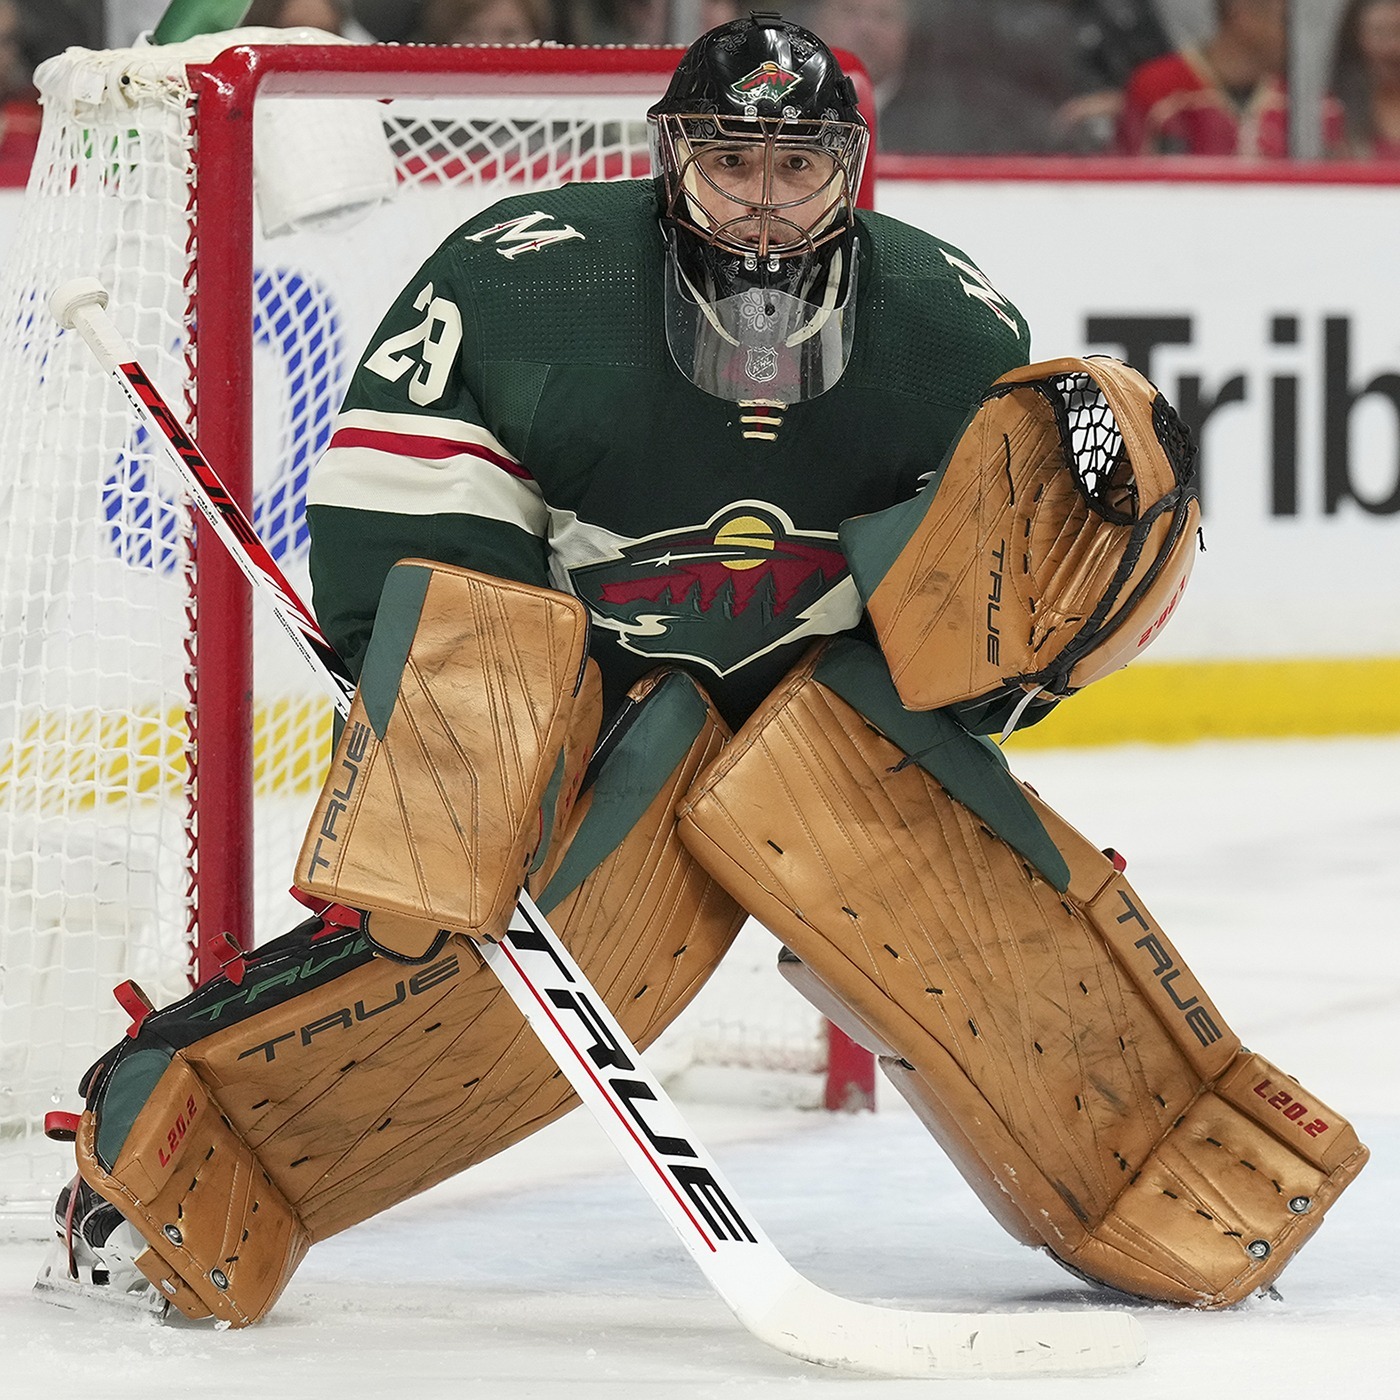 Are Talbot and Fleury the Best Minnesota Wild Goalie Tandem Ever?